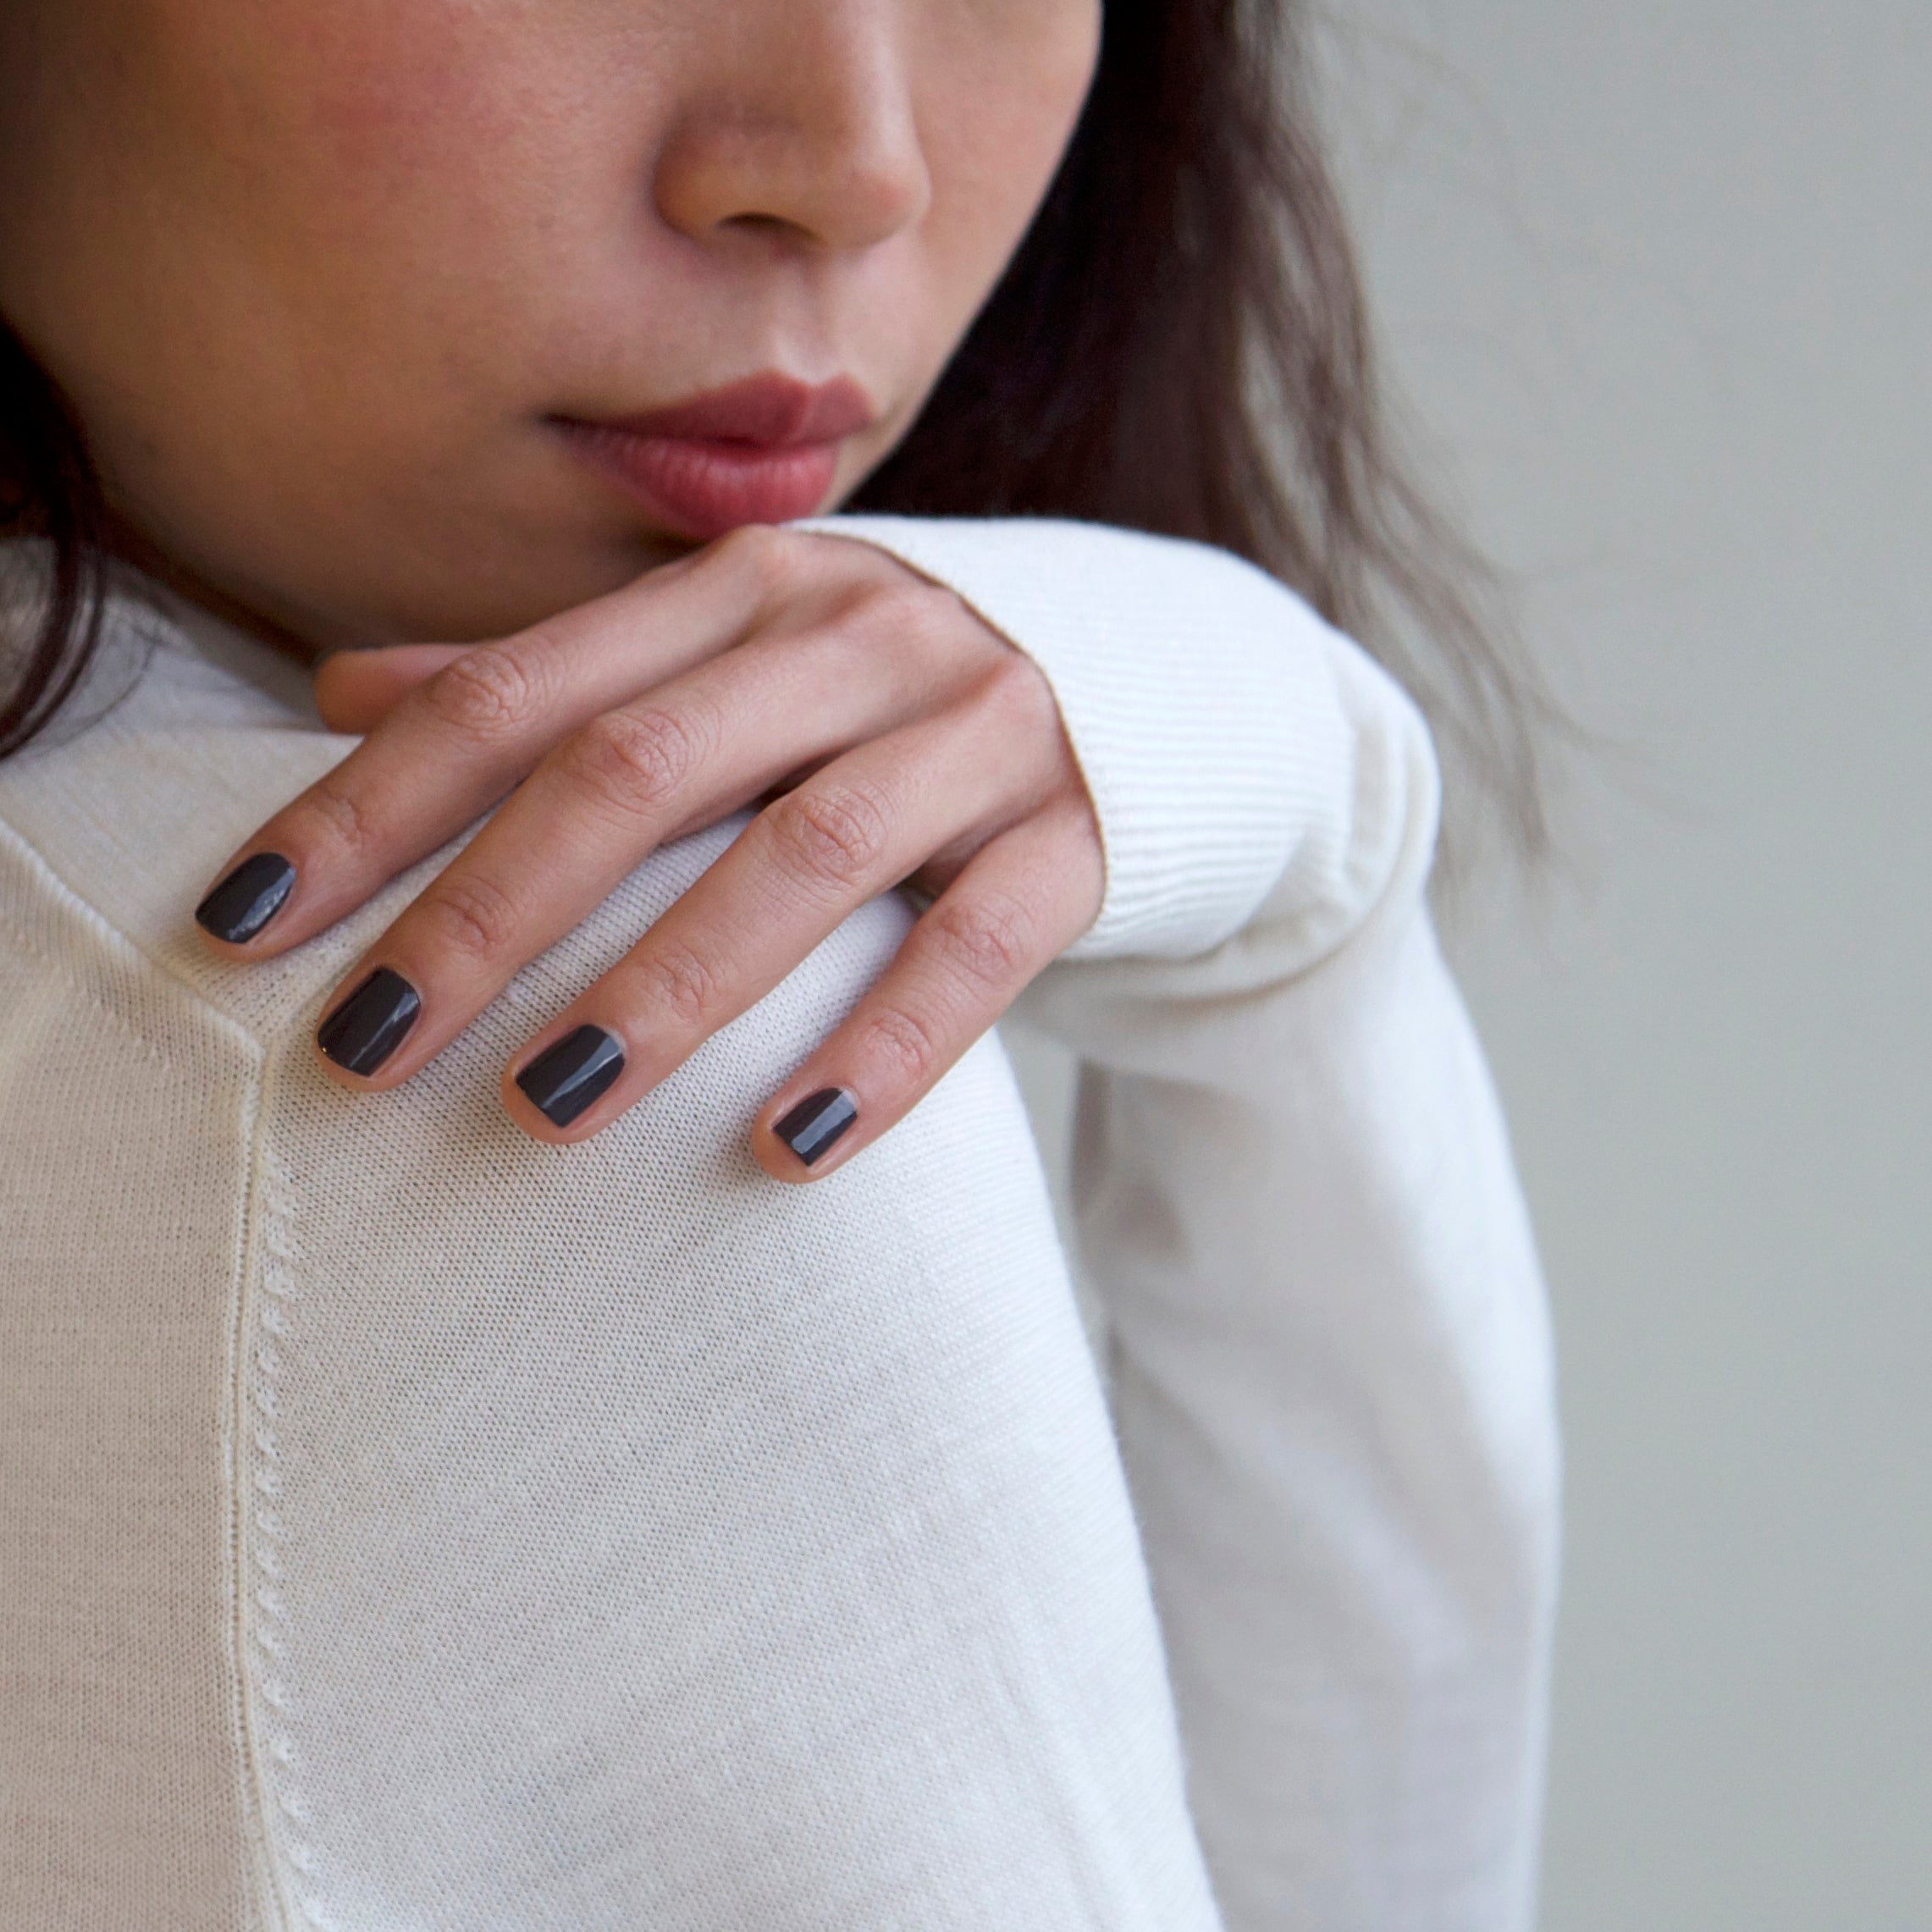 A female resting her hand on her shoulder wearing Volcanic Ash, a dark grey nail polish. Contrasting with her white top and grey background.